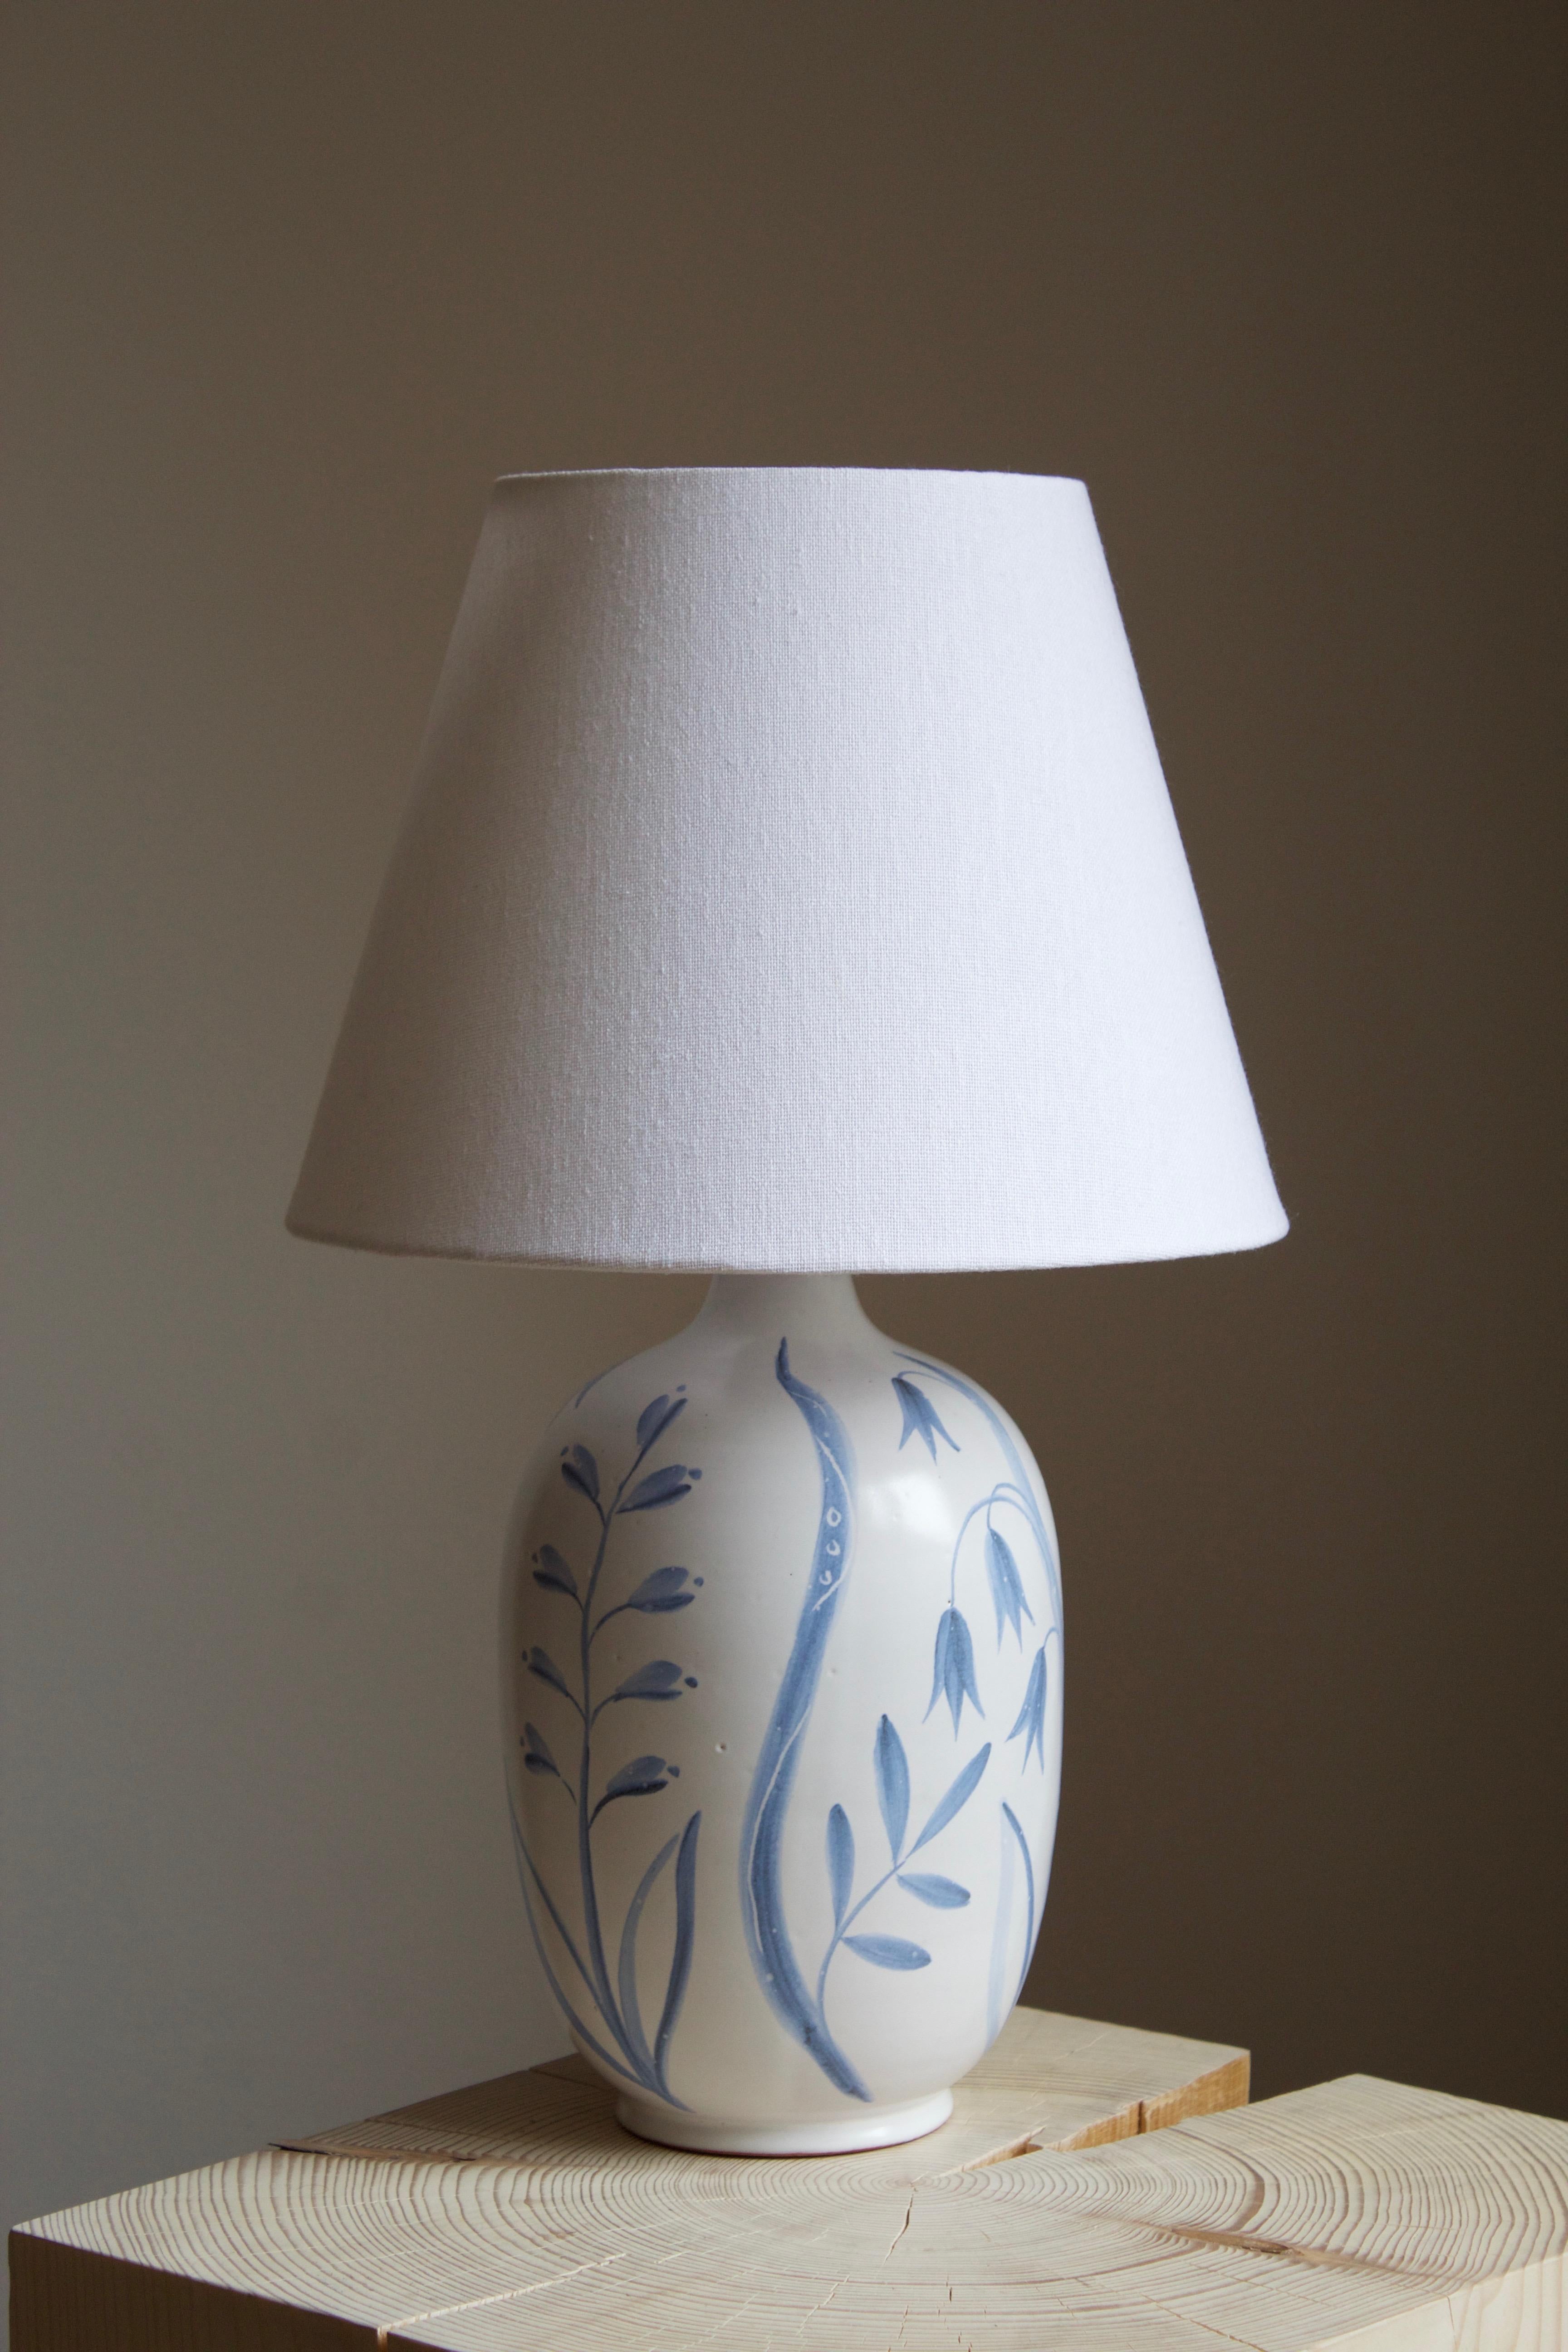 An early modernist table lamp model Flora. Designed by Anna-Lisa Thomson, for Upsala-Ekeby, Sweden. With stamp including artist's initials. Only produced in 1949.

Sold without lampshade. Stated dimensions excluding lampshade. Sold without